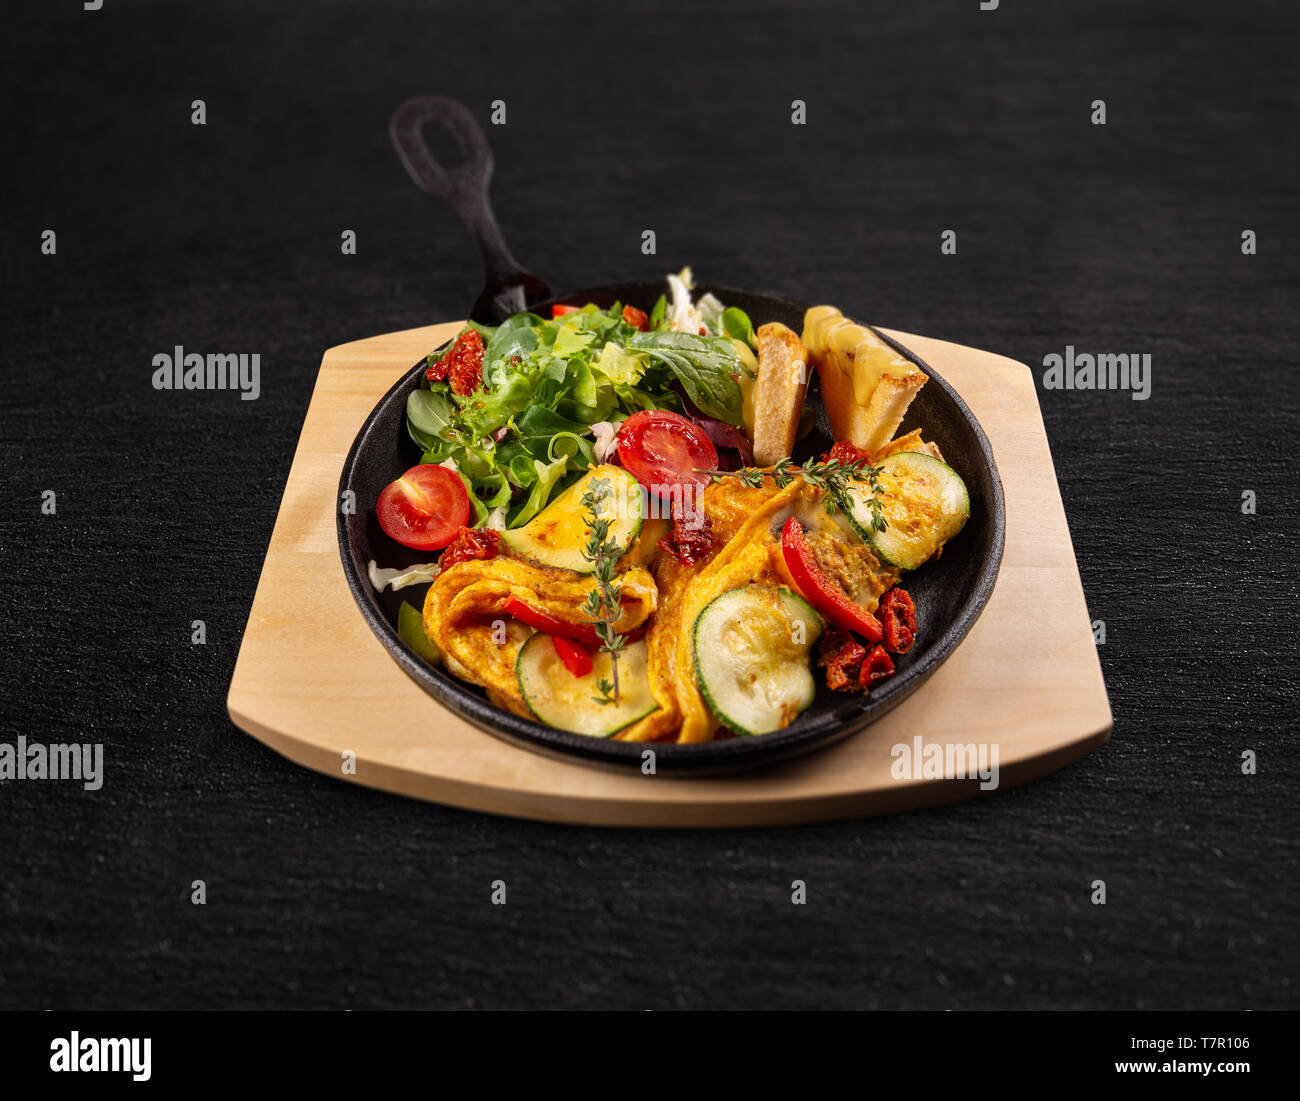 Omelette with veggies and fresh salad, healthy breakfast meal Stock Photo